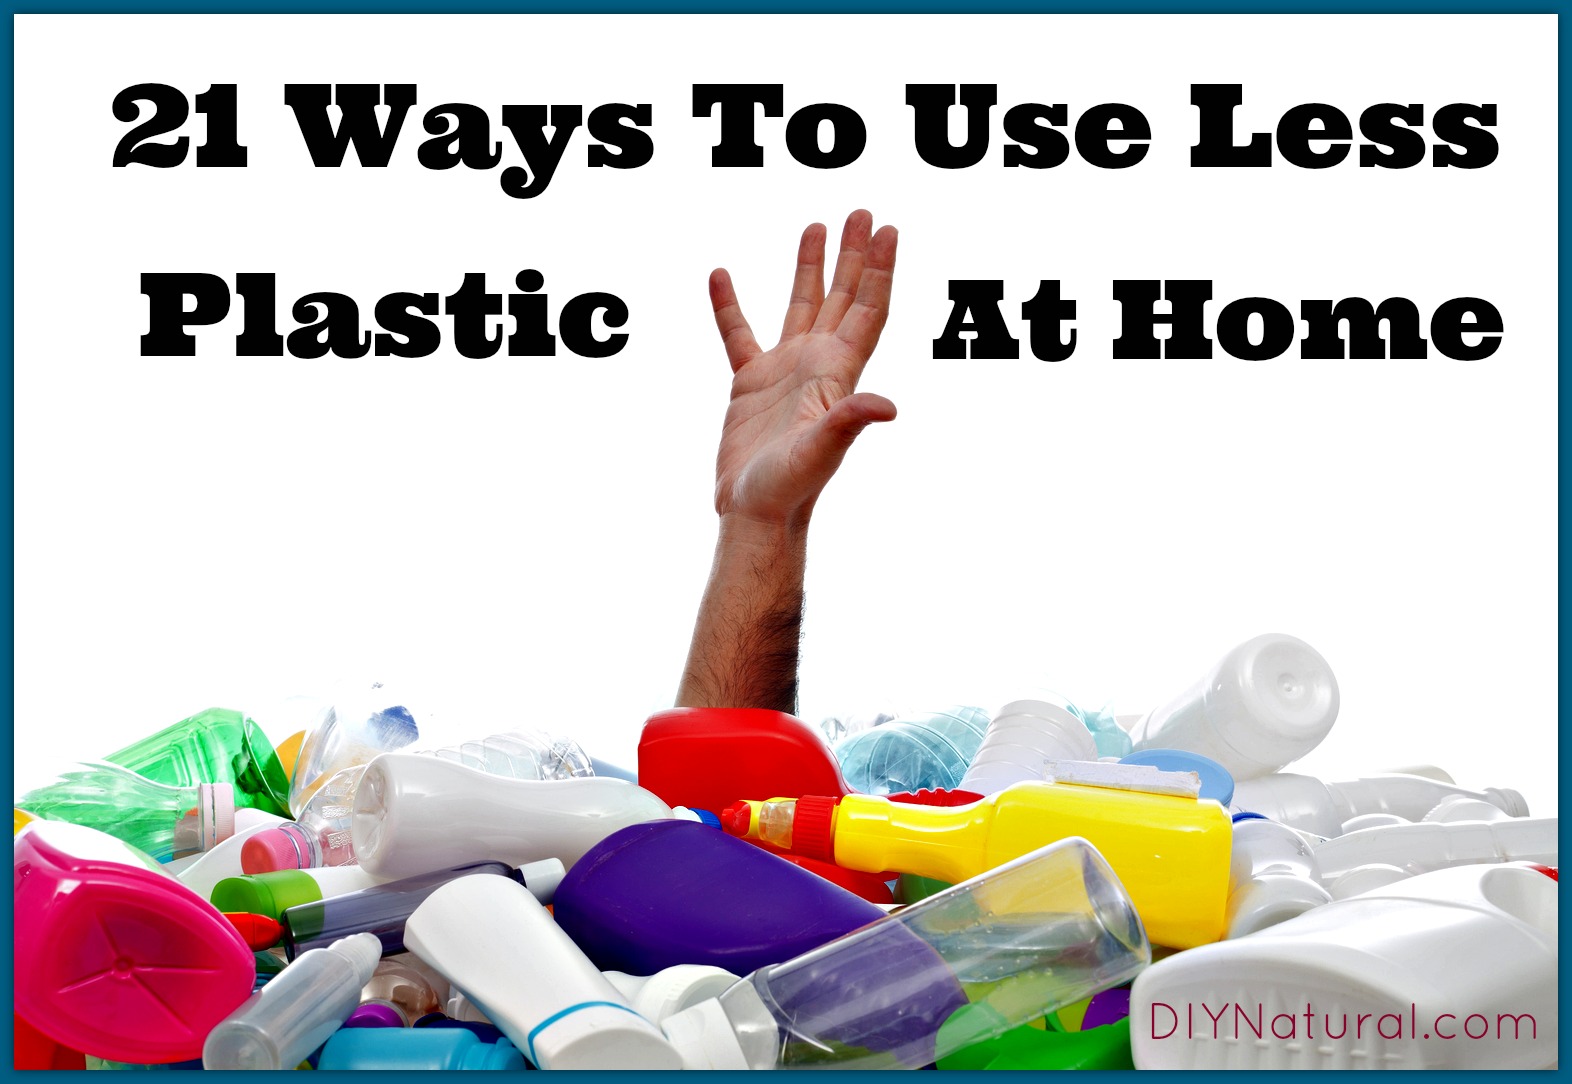 Plastic Free 21 Ways to Reduce Plastic in Your Home